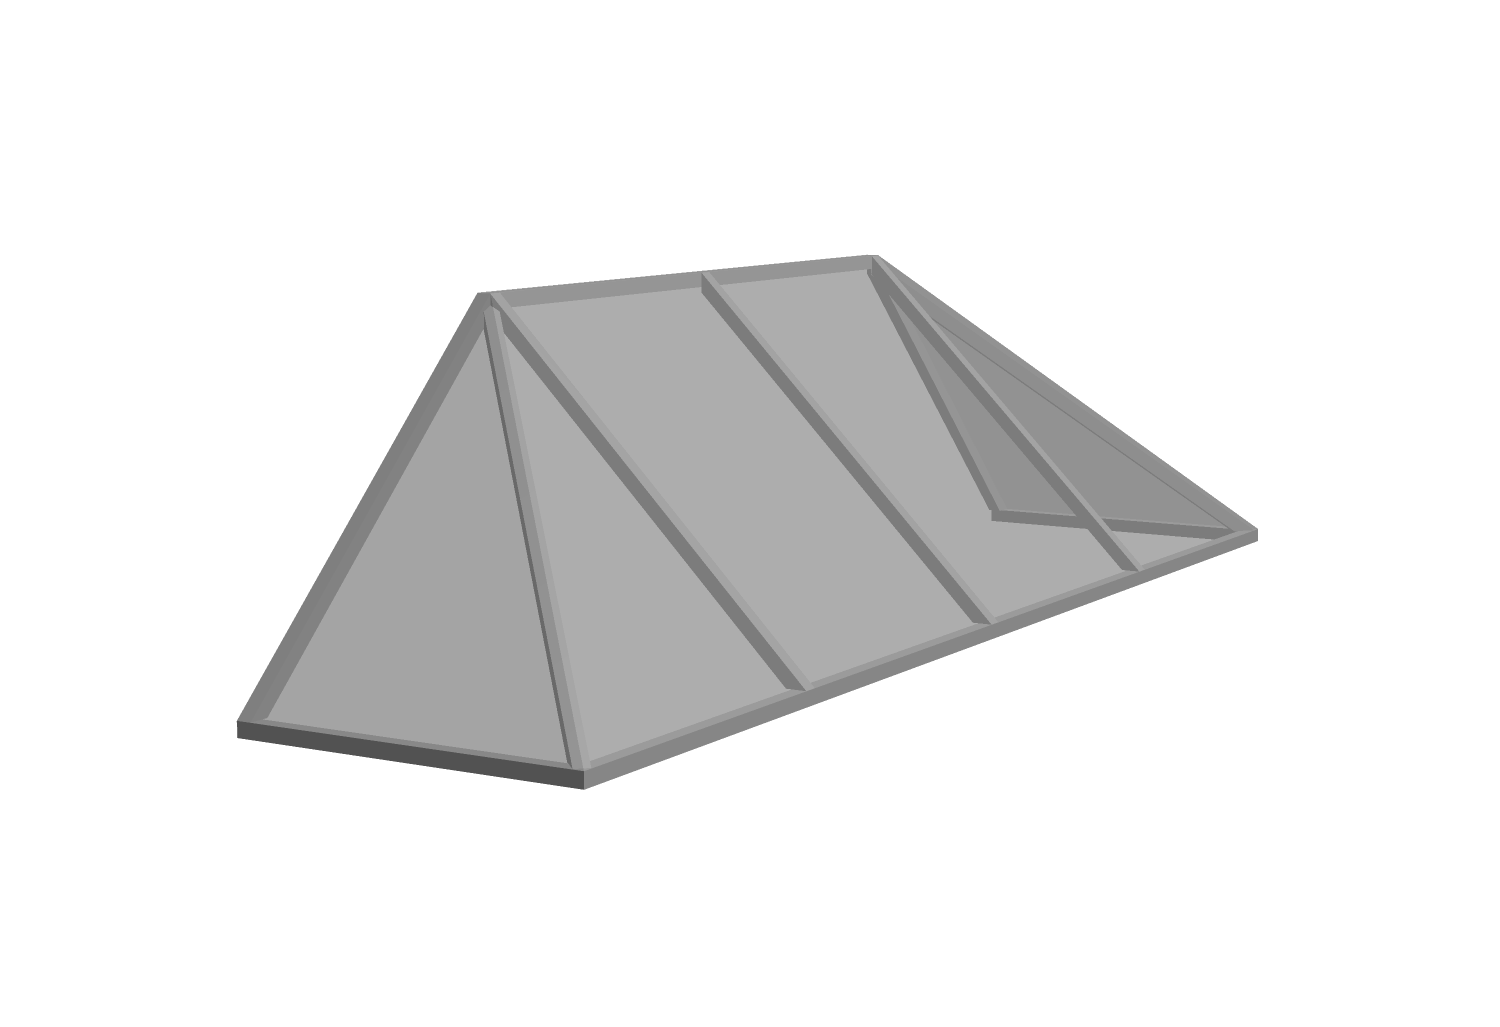 3D model of a hipped traditional awning